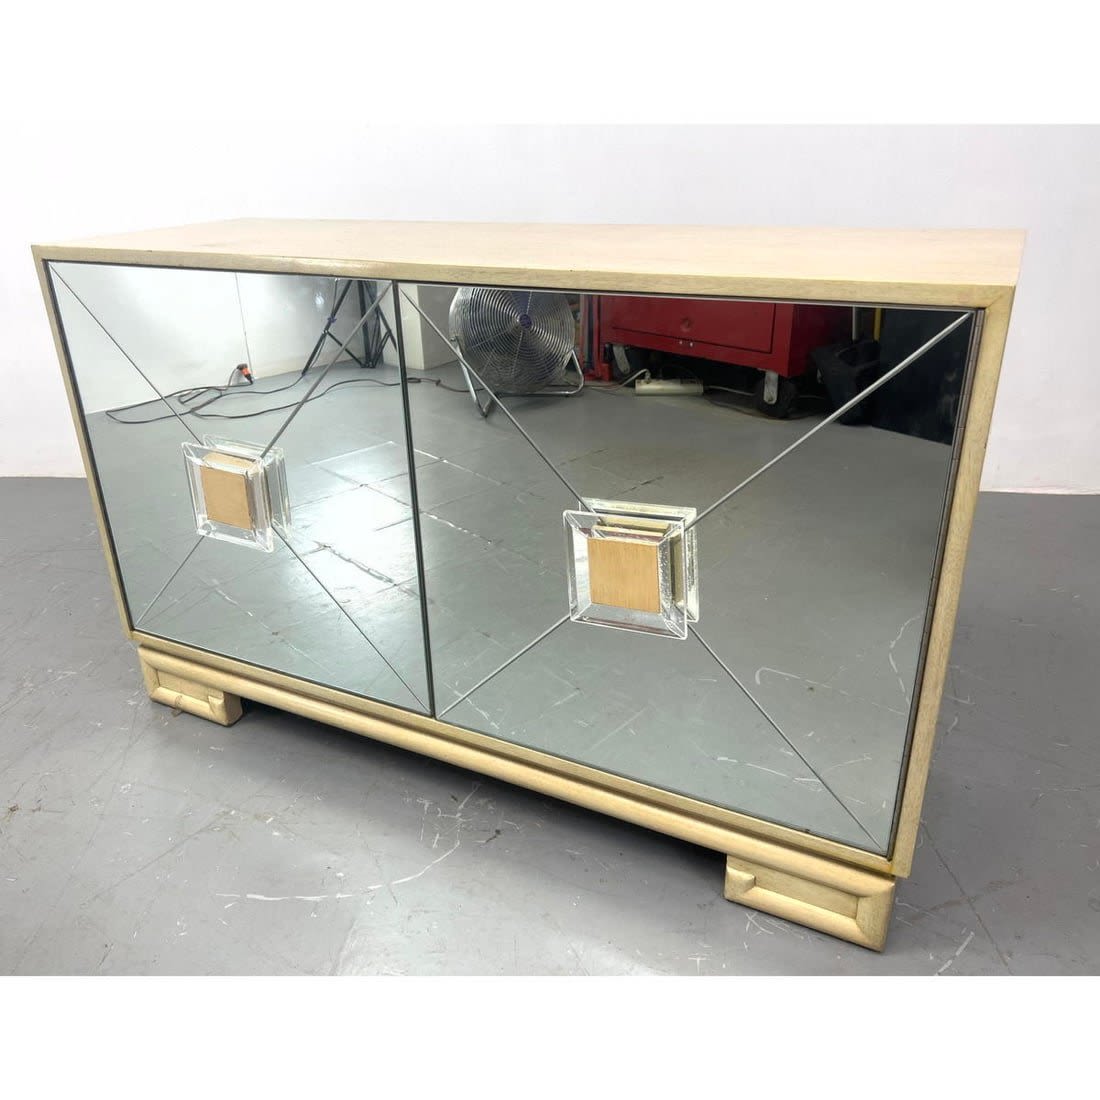 Decorator Mirrored Front Server 362ddb